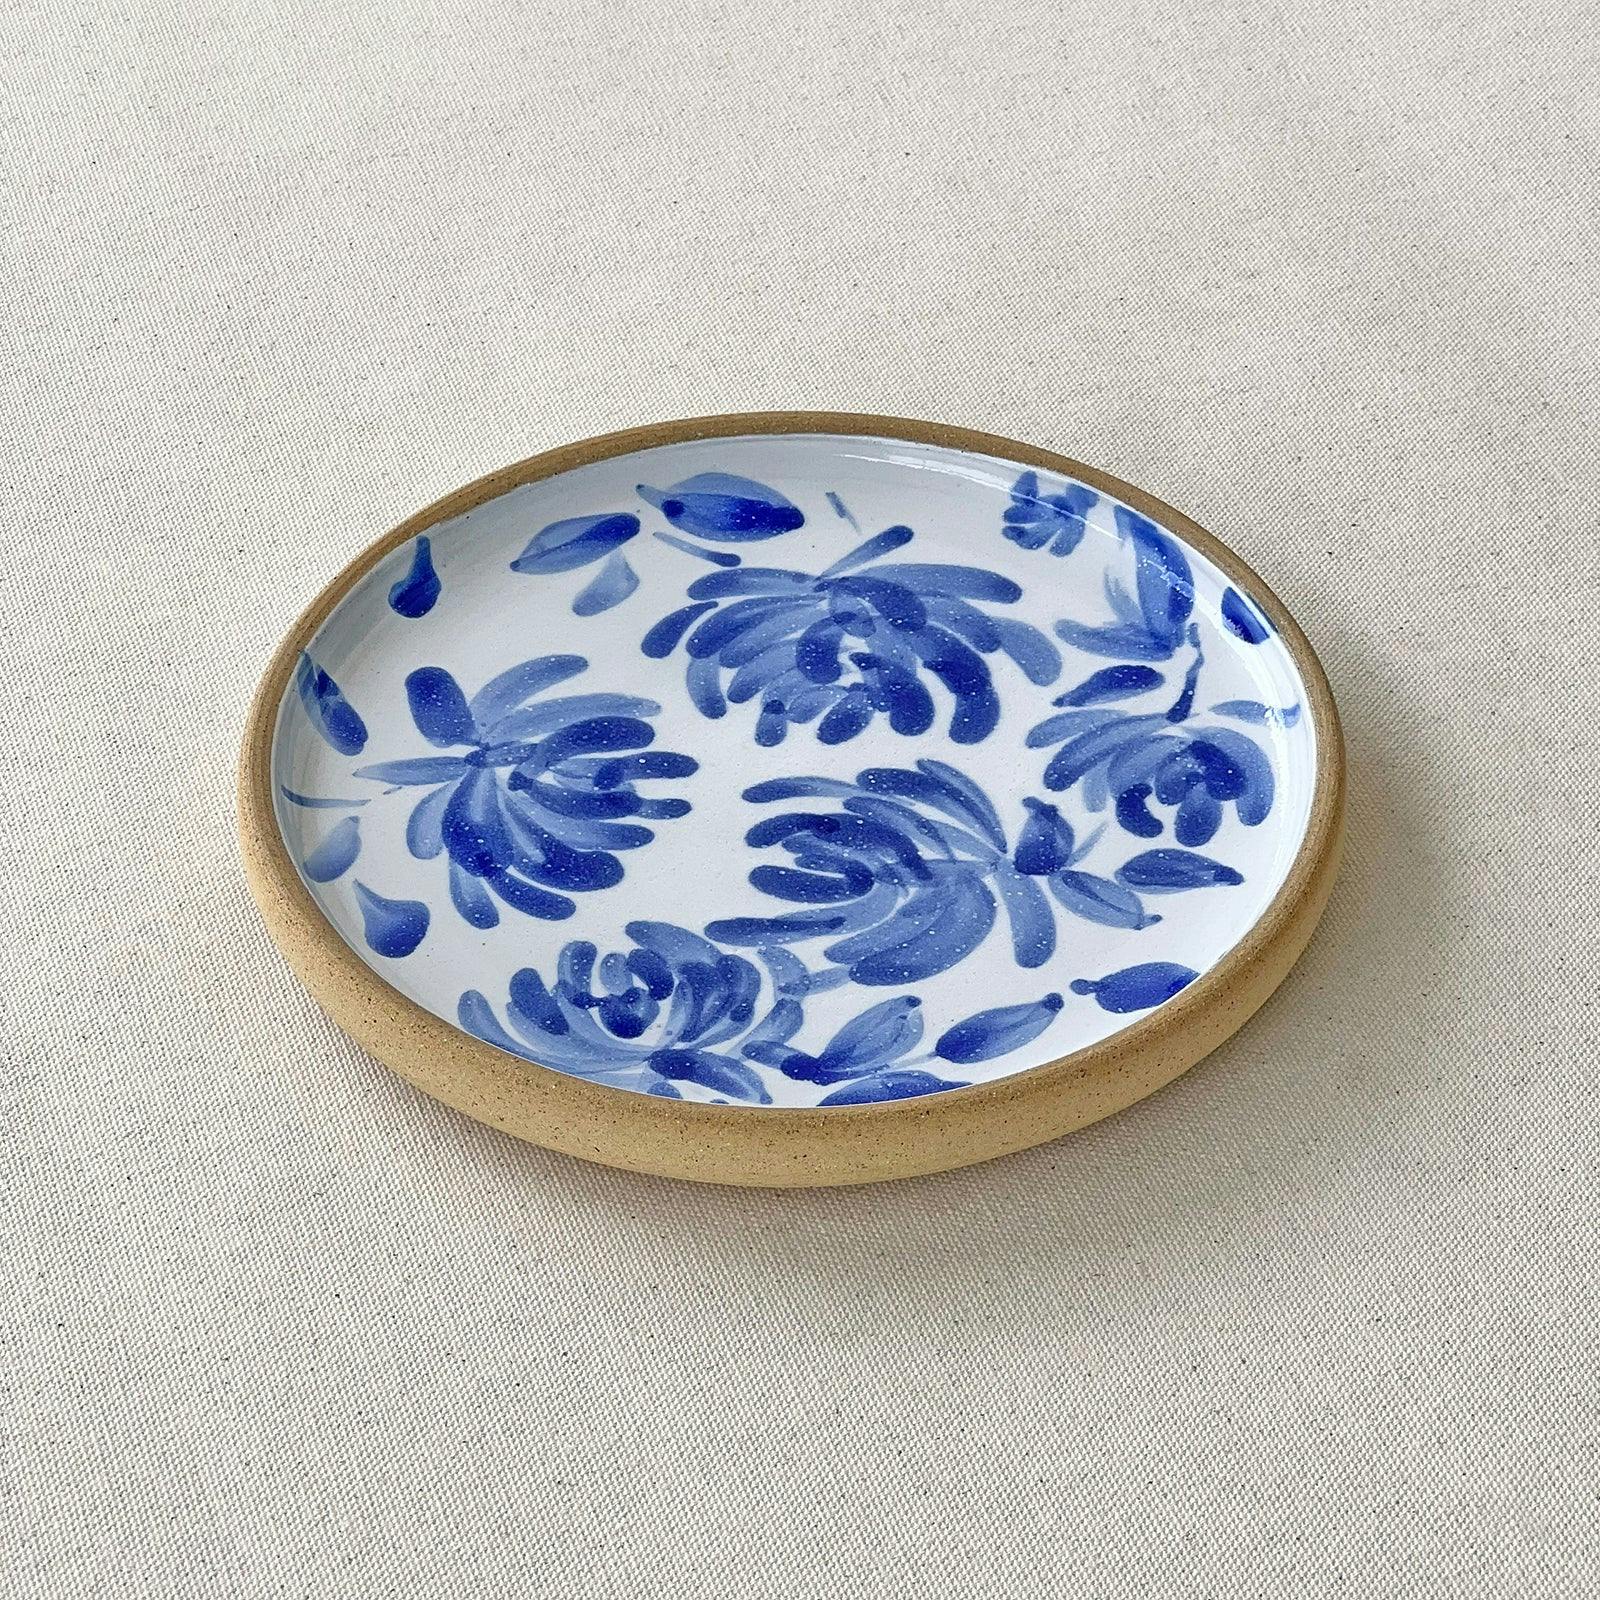 Chrysanthemum Side Plate, a product by Midori Collective